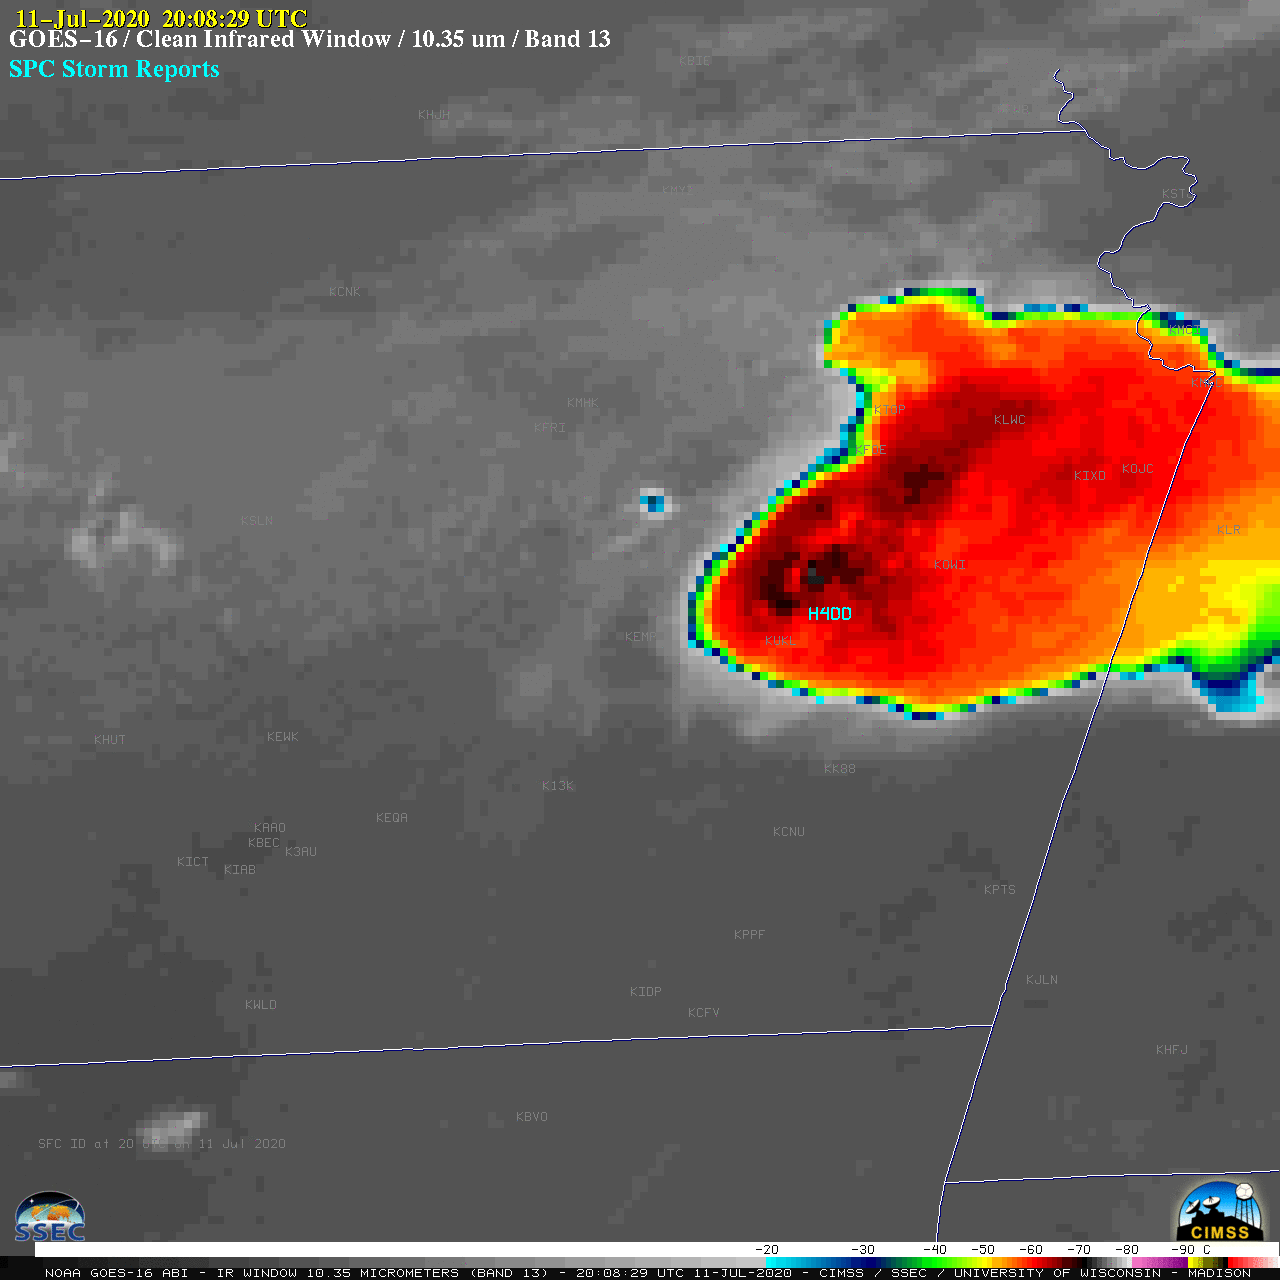 GOES-16 “Clean” Infrared Window (10.35 µm) images, with time-matched SPC Storm Reports plotted in violet [click to play animation | MP4]